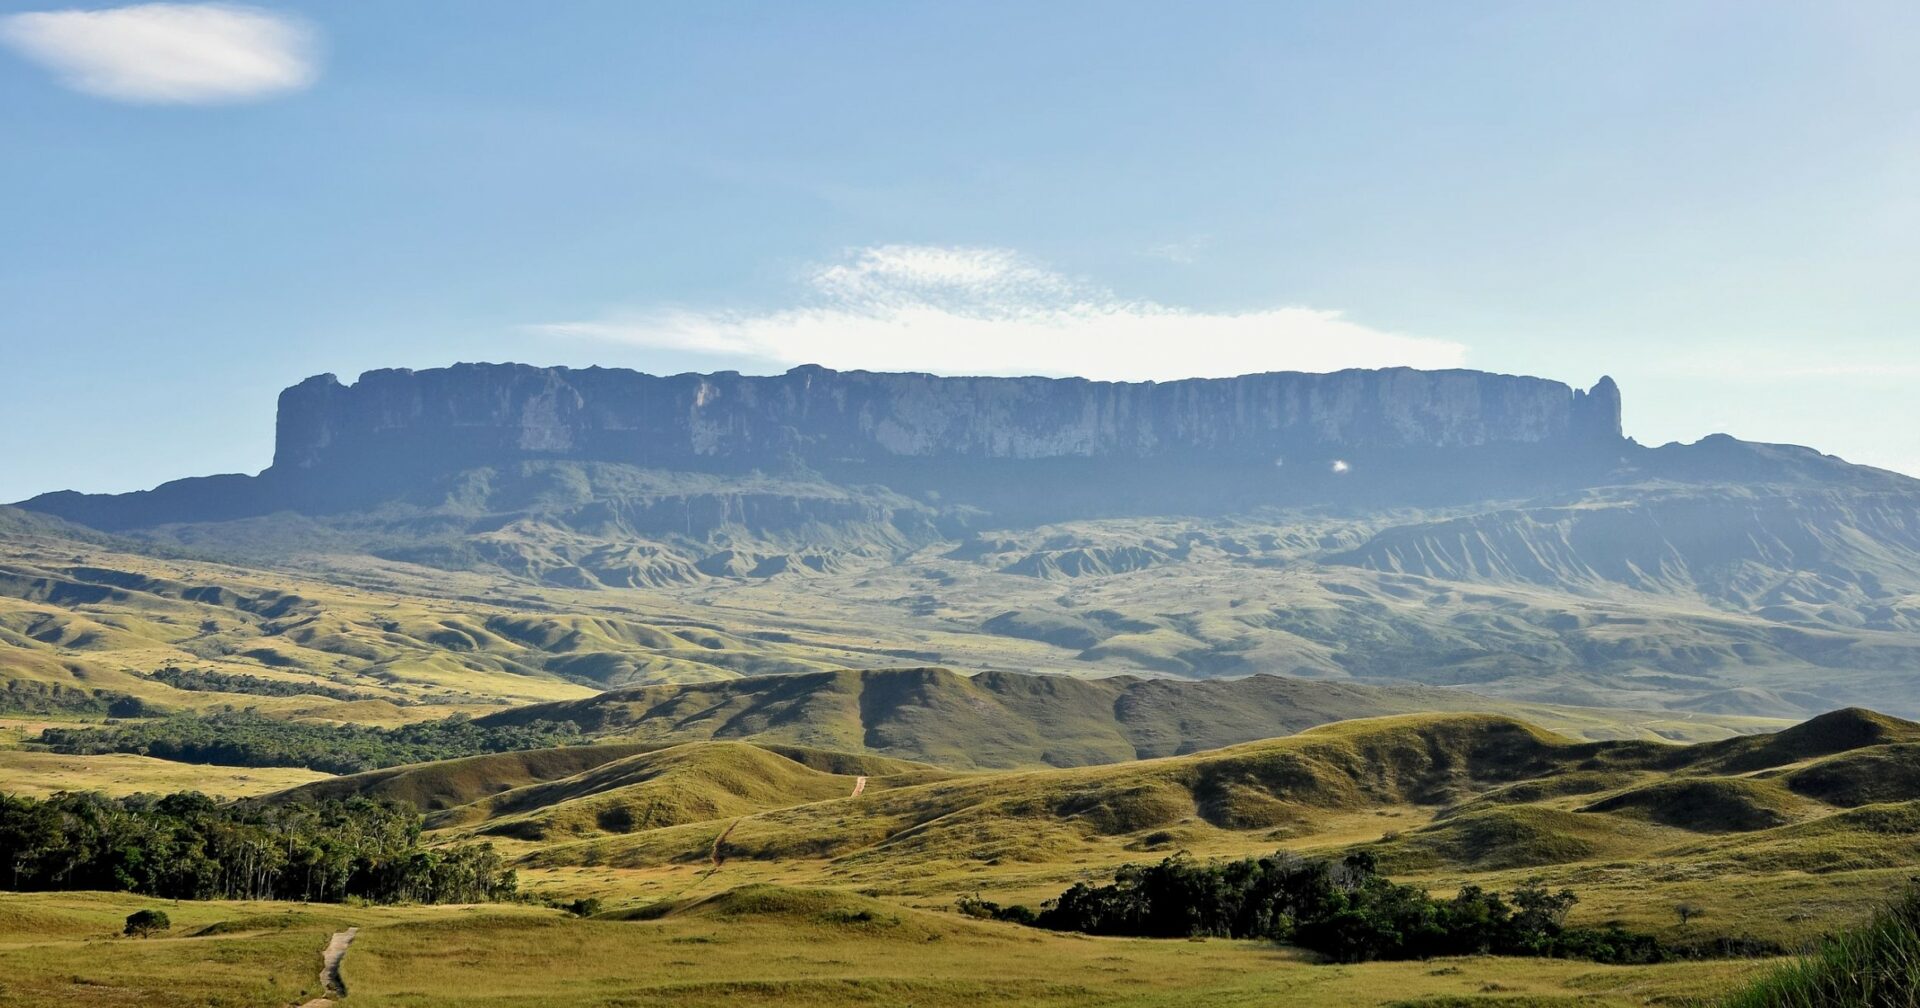 Mount Roraima, as seen from the road leading there from Paraitepuy pemon community, in Gran Sabana Venezuela.